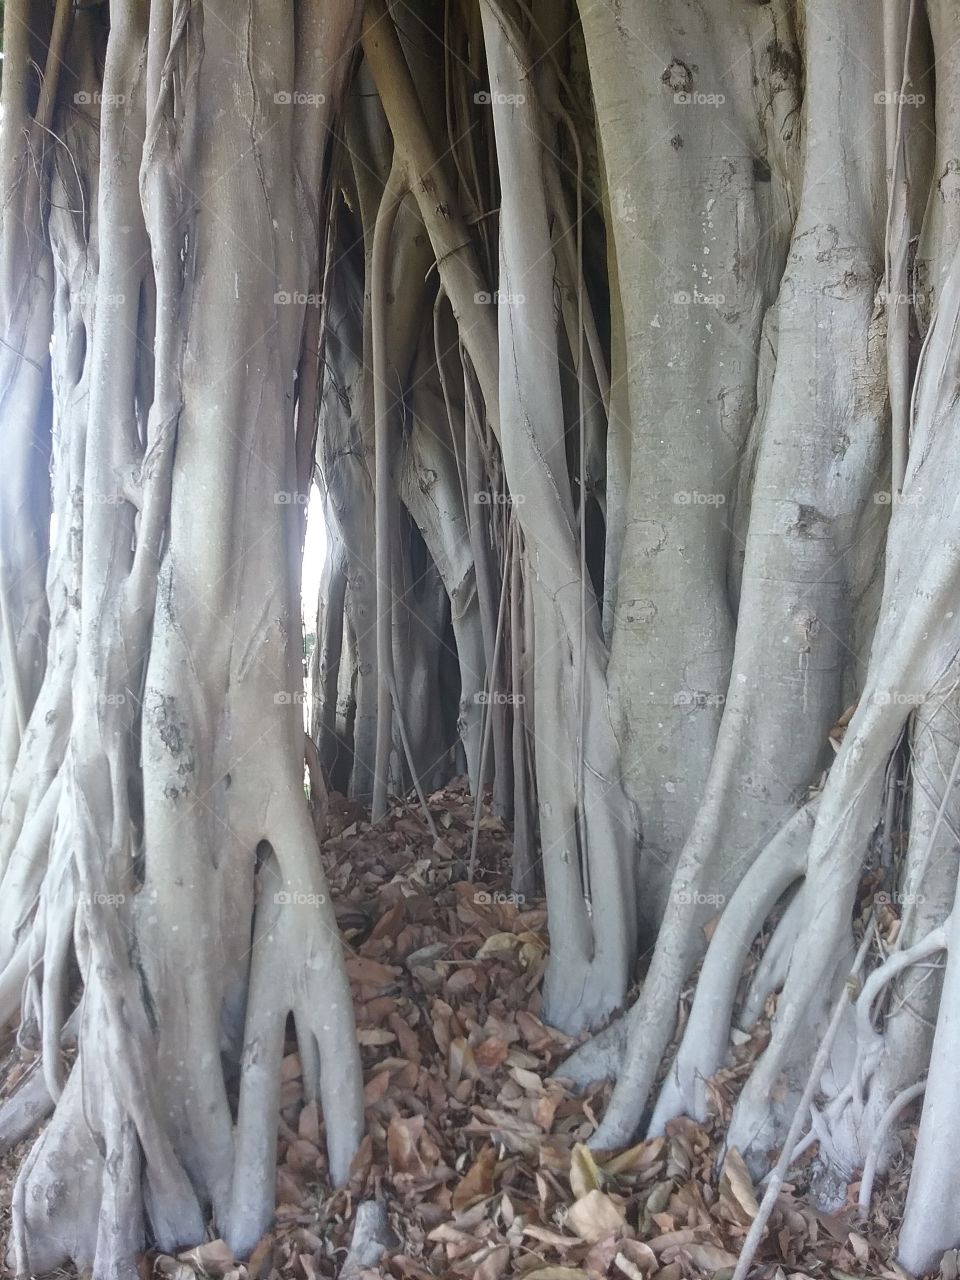 ginormous fig tree